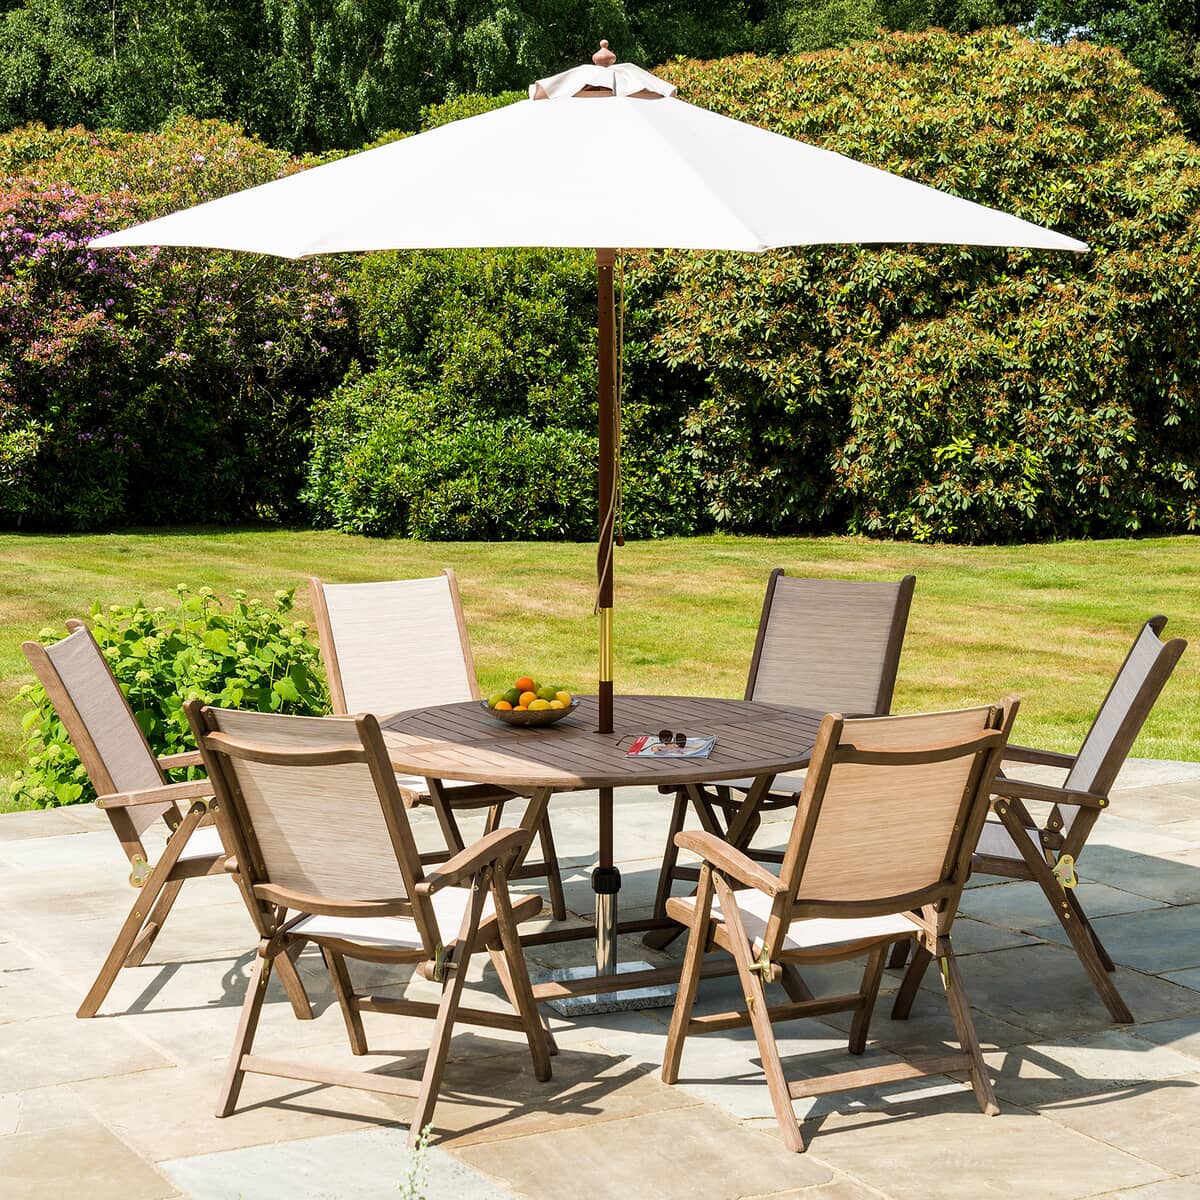 Alexander Rose Sherwood 6 Seat Round Dining Table Set with Sling Recliners and Parasol